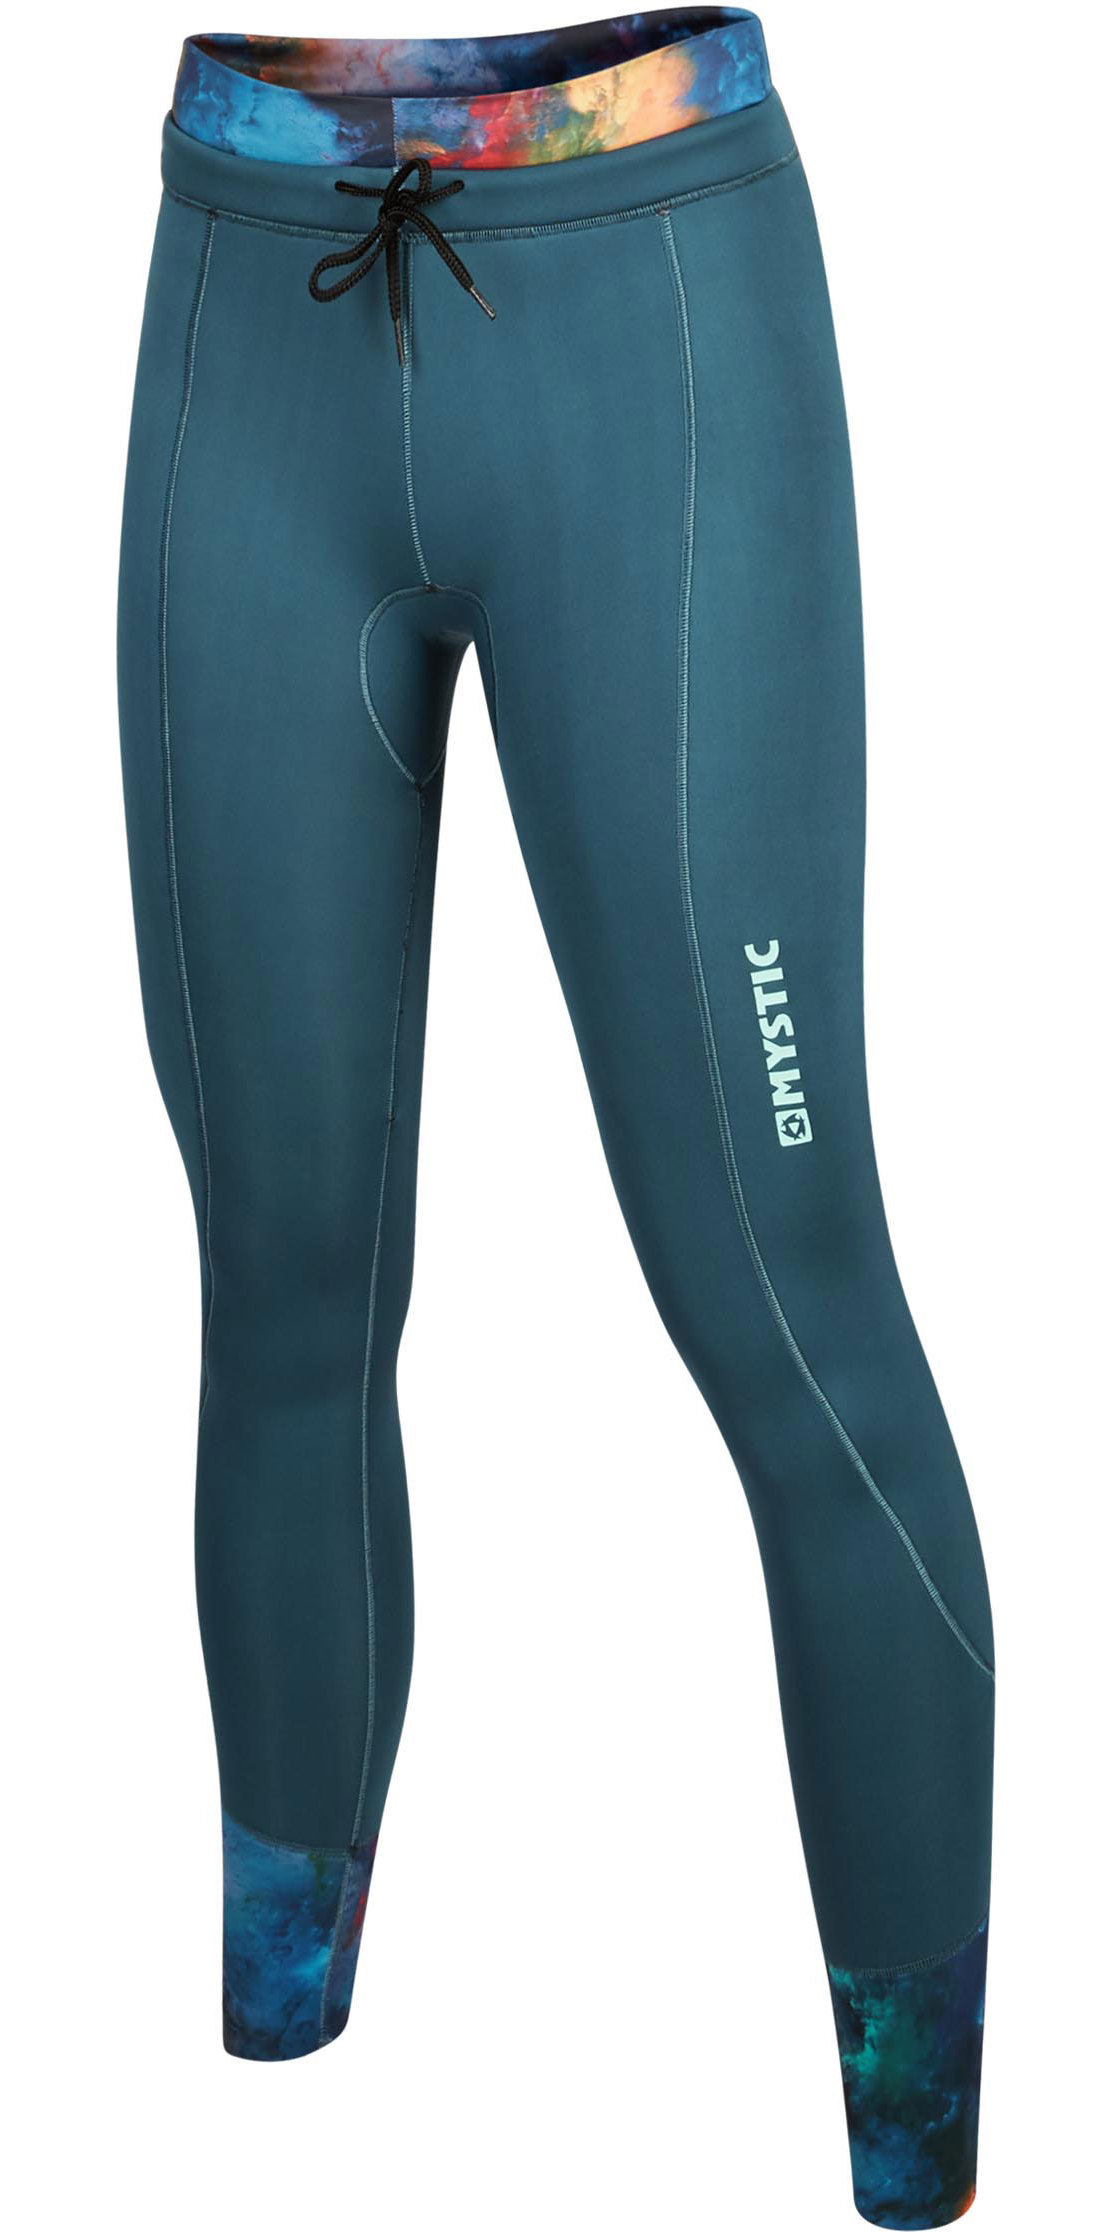 2020 Mystic Womens Diva 2mm Neoprene Trousers 200076  Teal  Wetsuit Tops  Shorts  Wetsuit Outlet